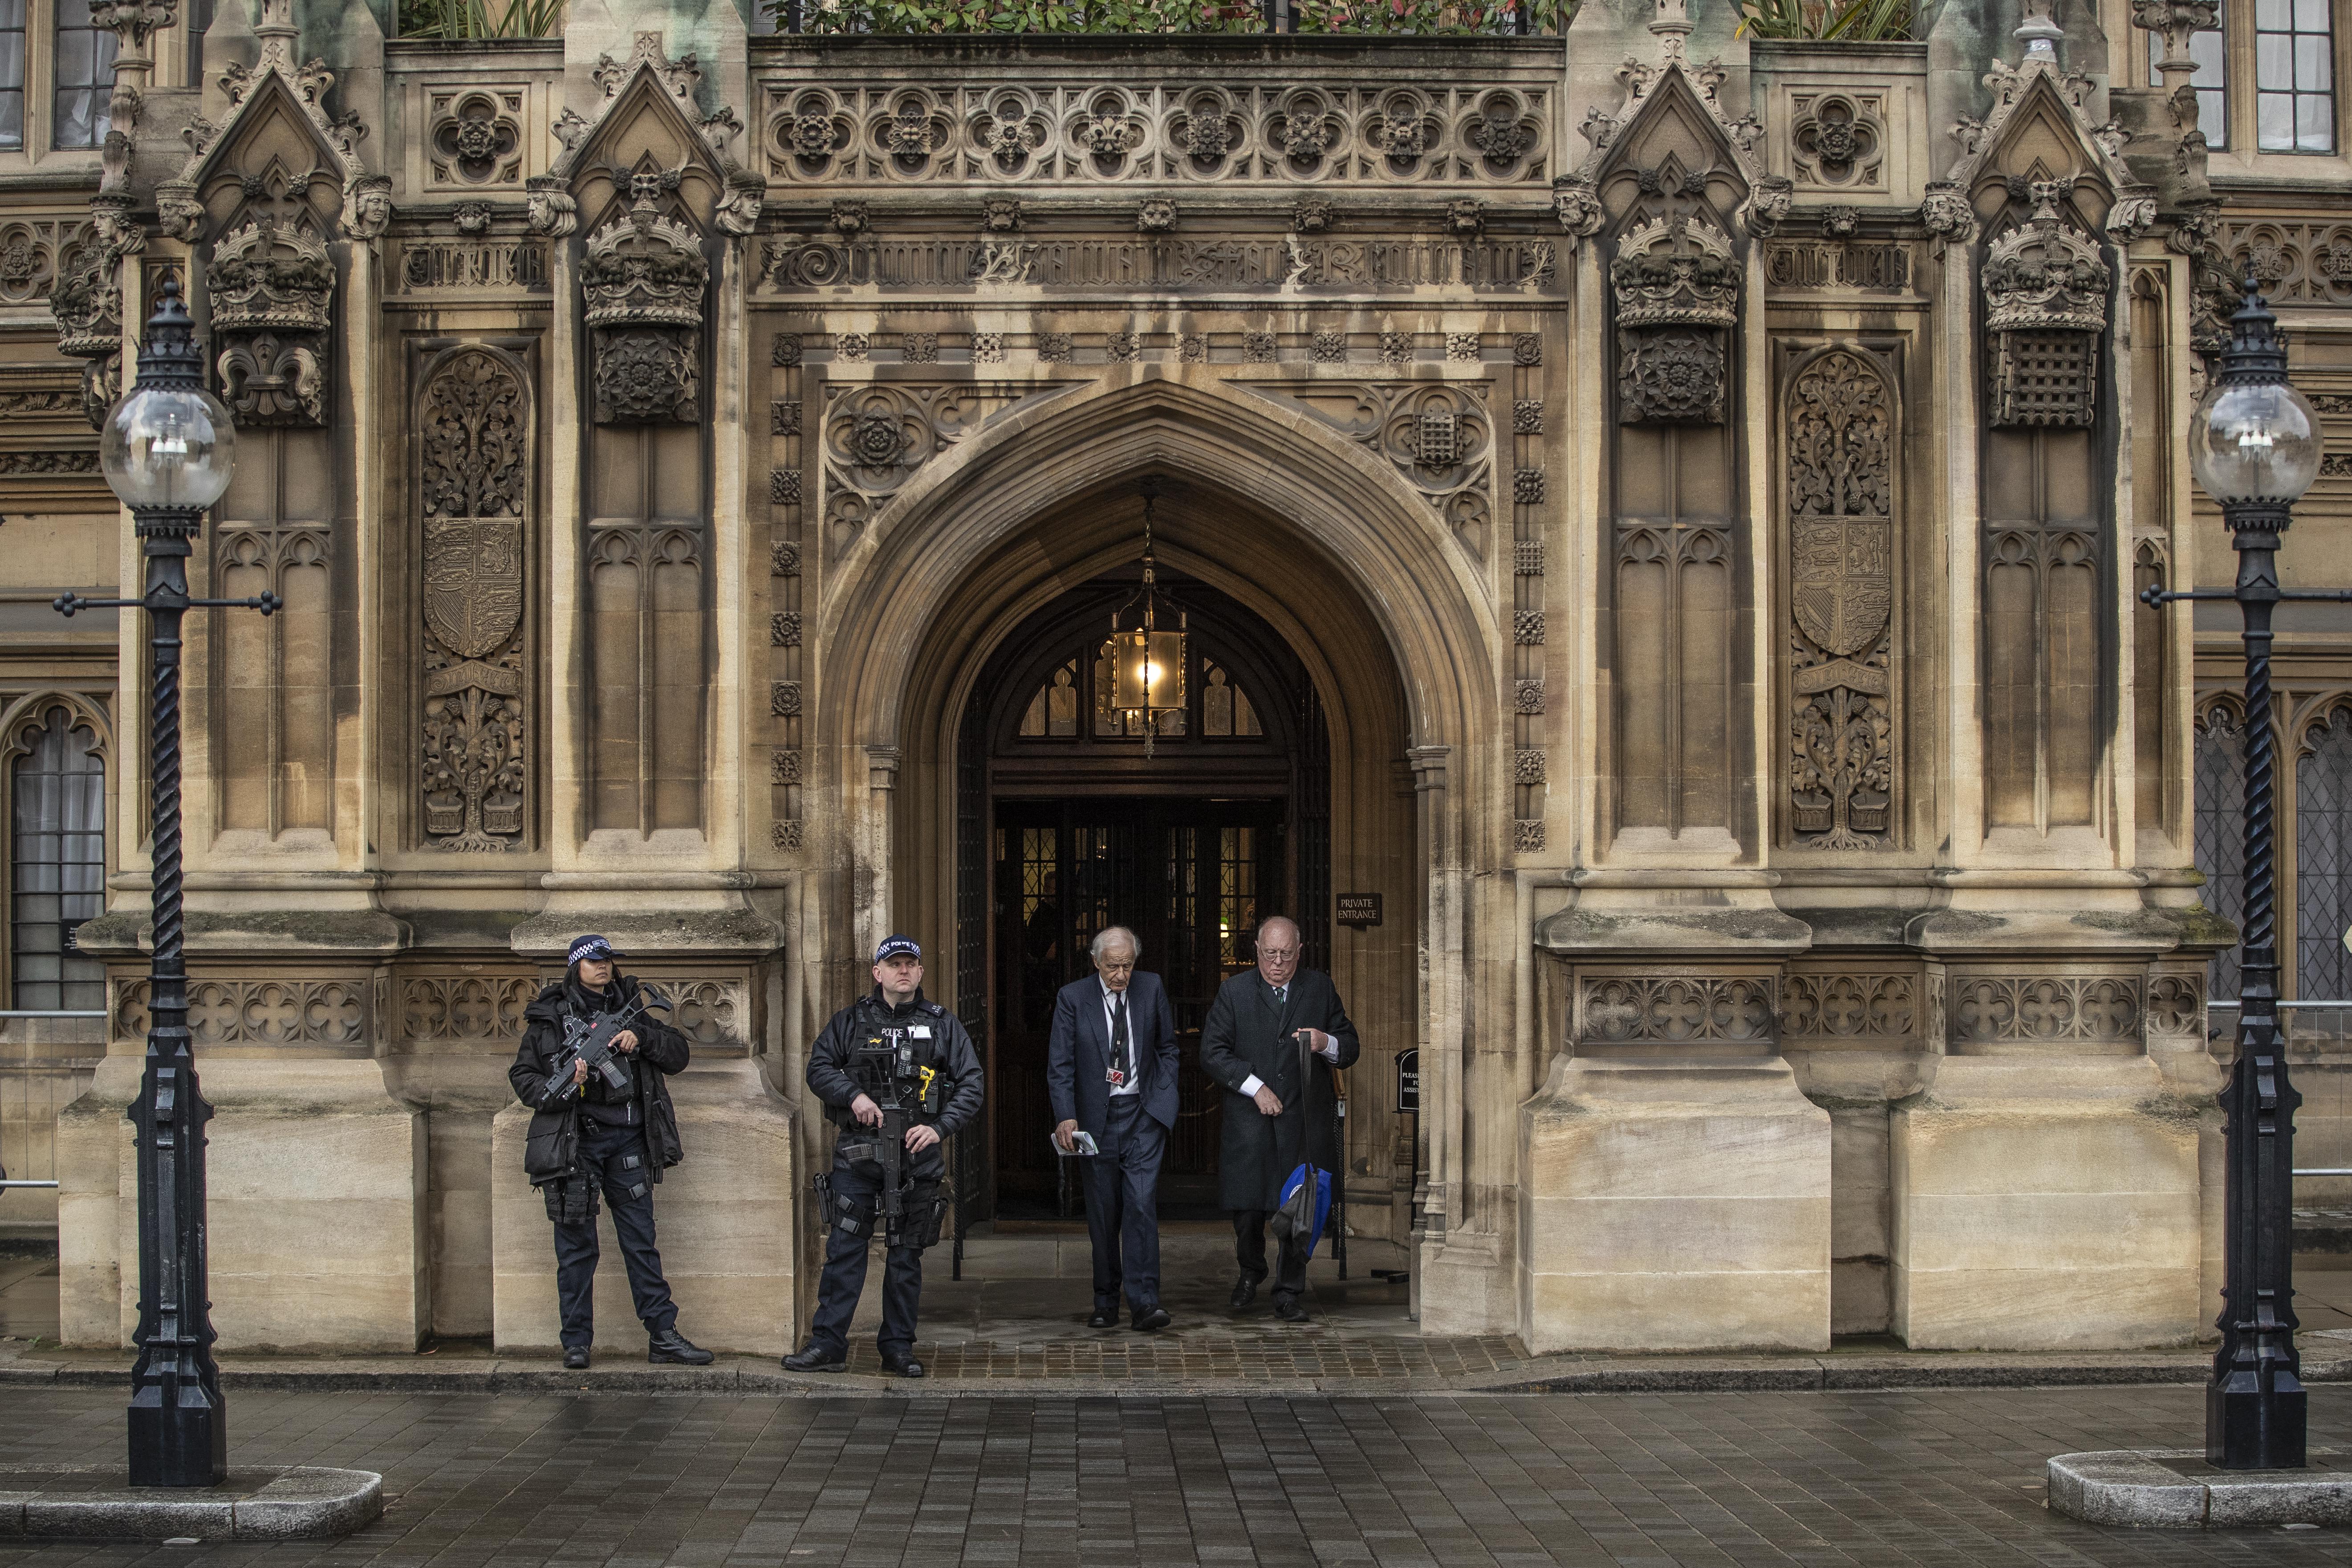 The "Peers Entrance" to the Houses of Parliament in London.